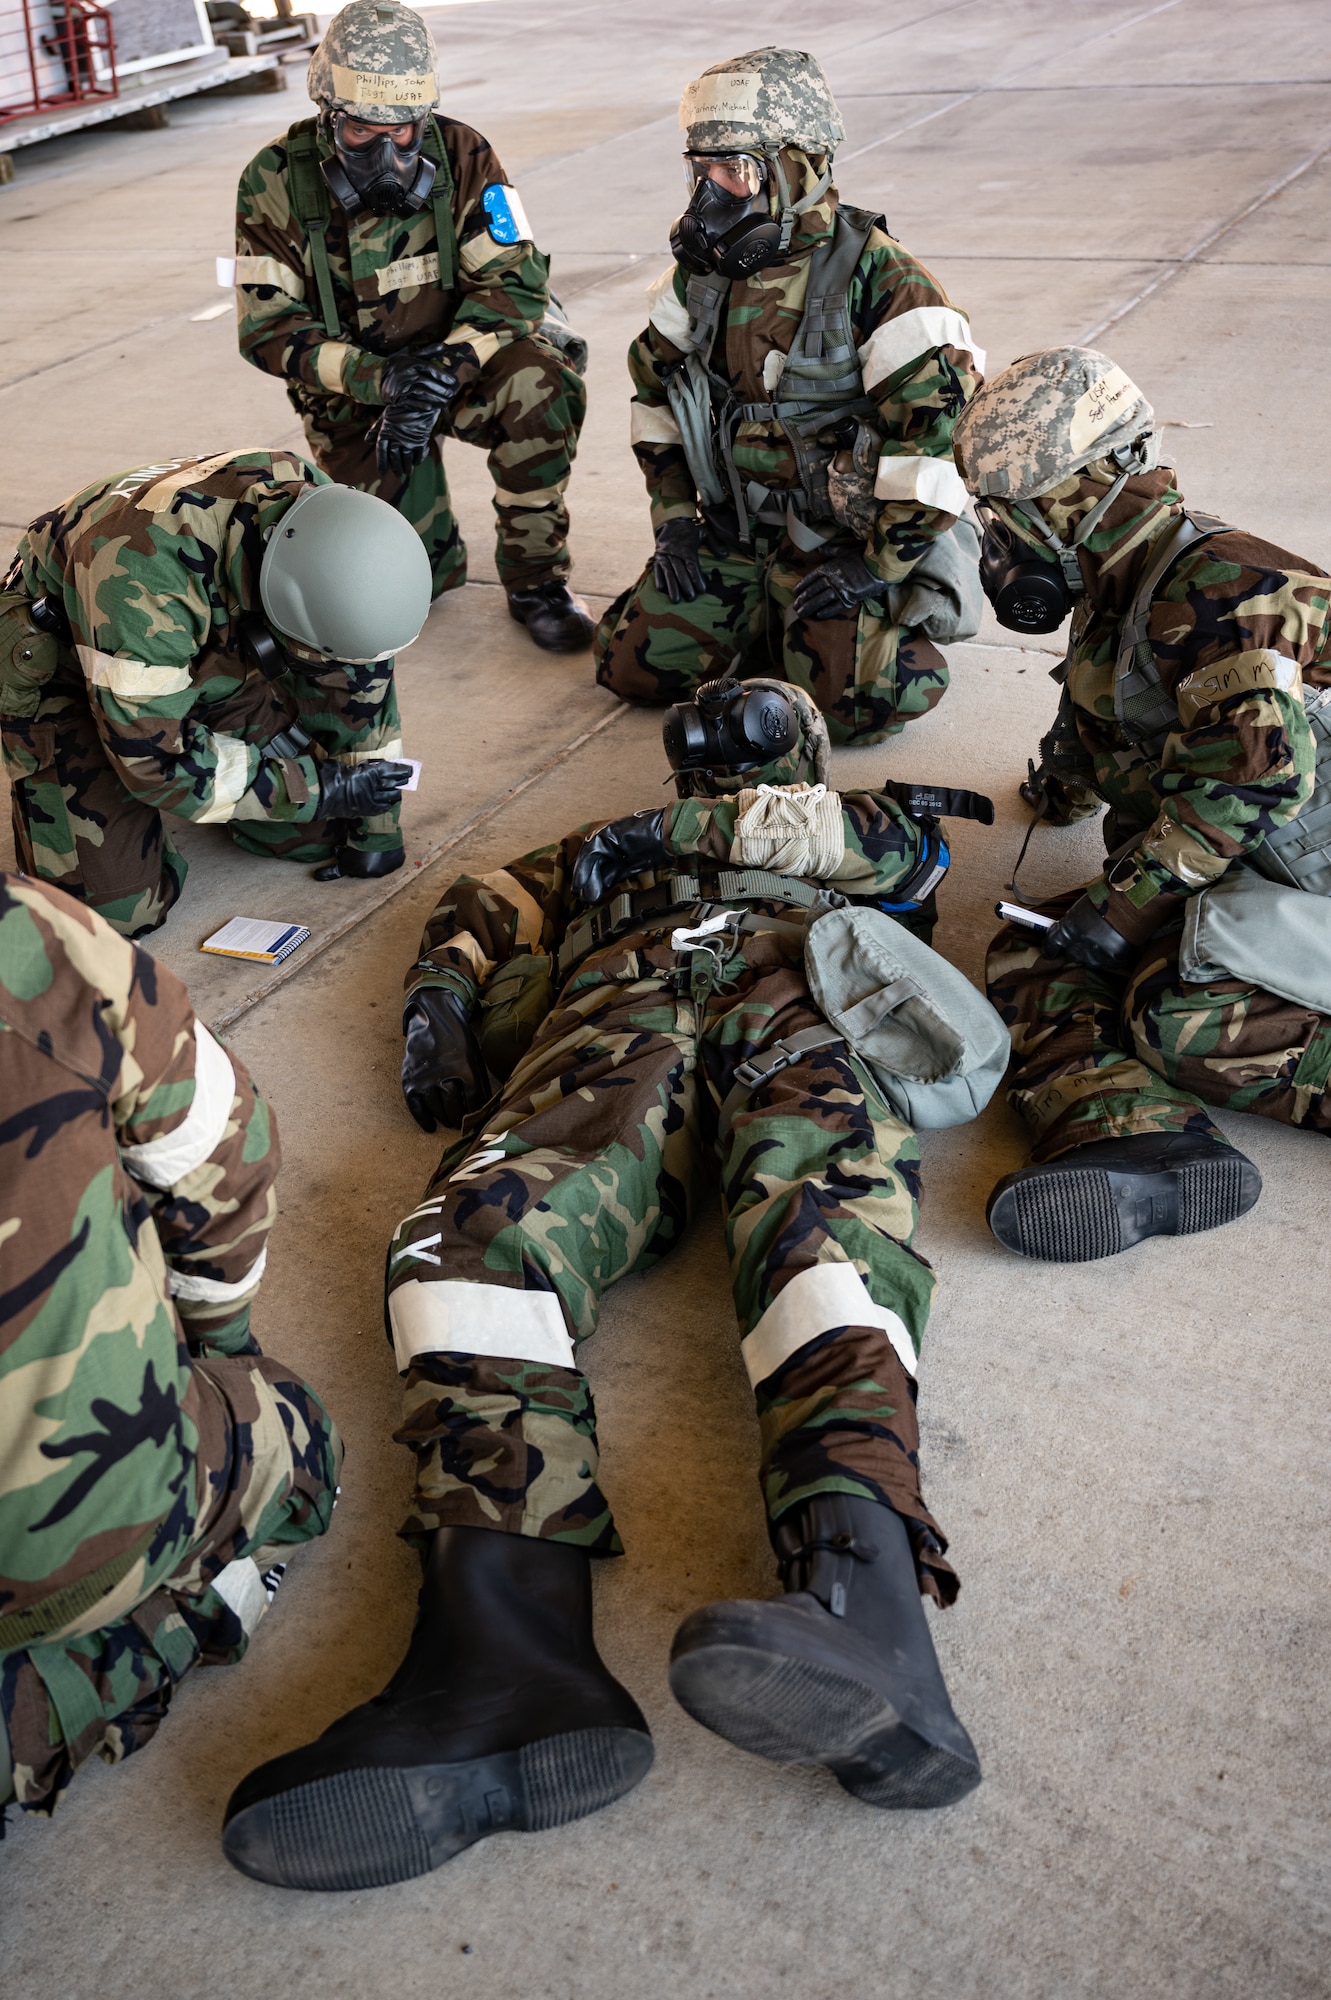 Maintainers assigned to the 130th Maintenance Group, Charleston, W.Va., practice tactical combat casualty care after a simulated attack during the unit’s Fly Away Readiness Exercise  March 30, 2023, at the Combat Readiness Training Center in Gulfport, Miss. FLARE is a commander-directed readiness exercise to inform commanders of their units’ ability to deploy using the Agile Combat Employment model.